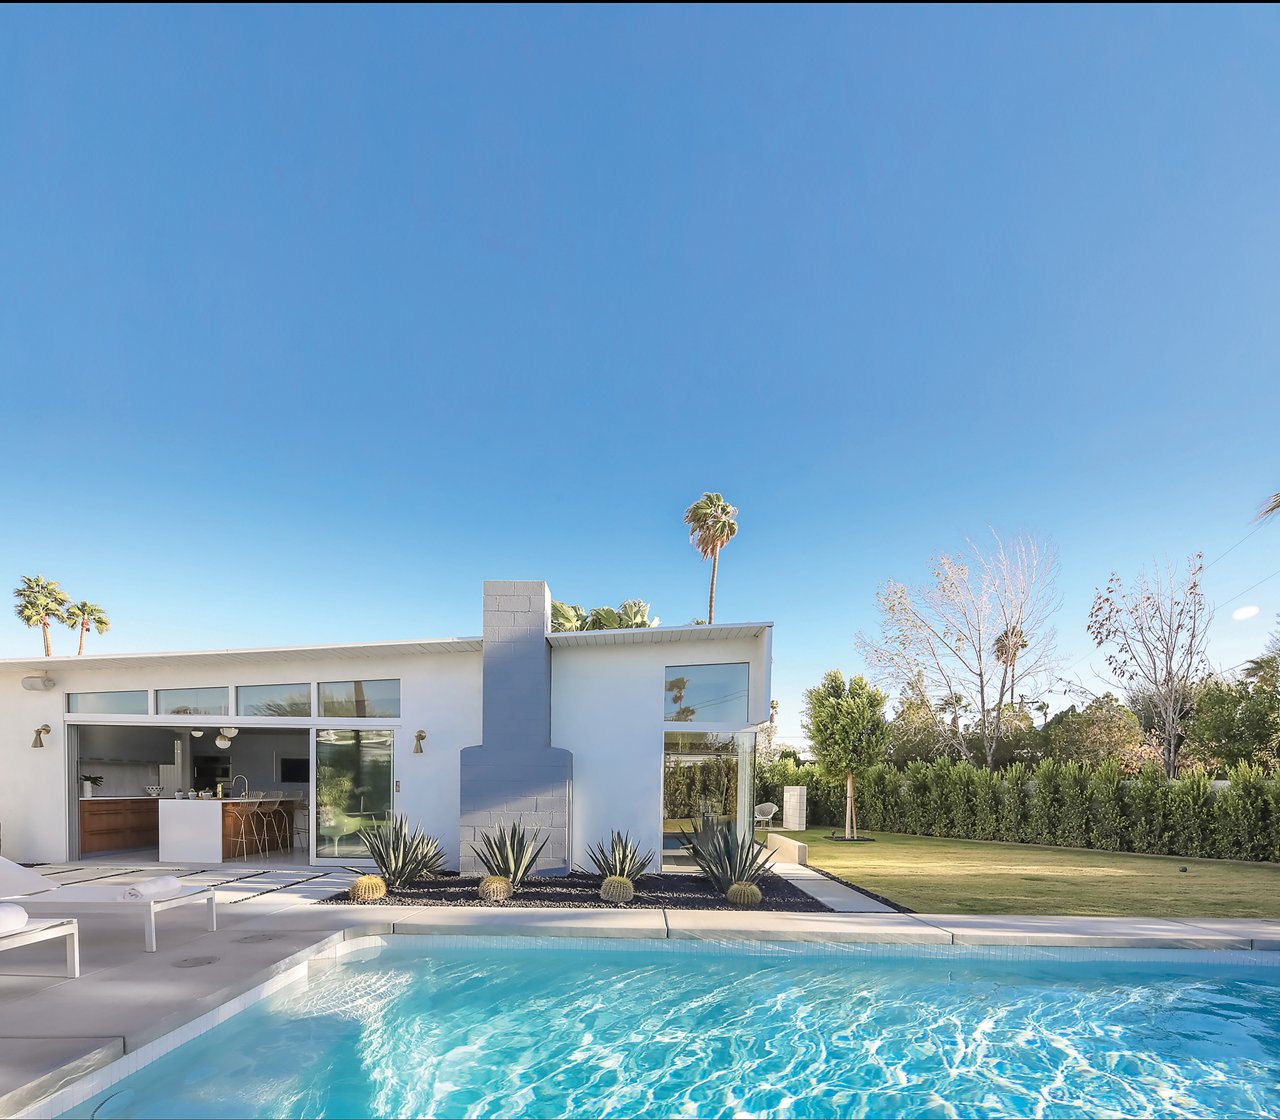 Exterior shot of a mid-century modern house with a gorgeous blue pool.